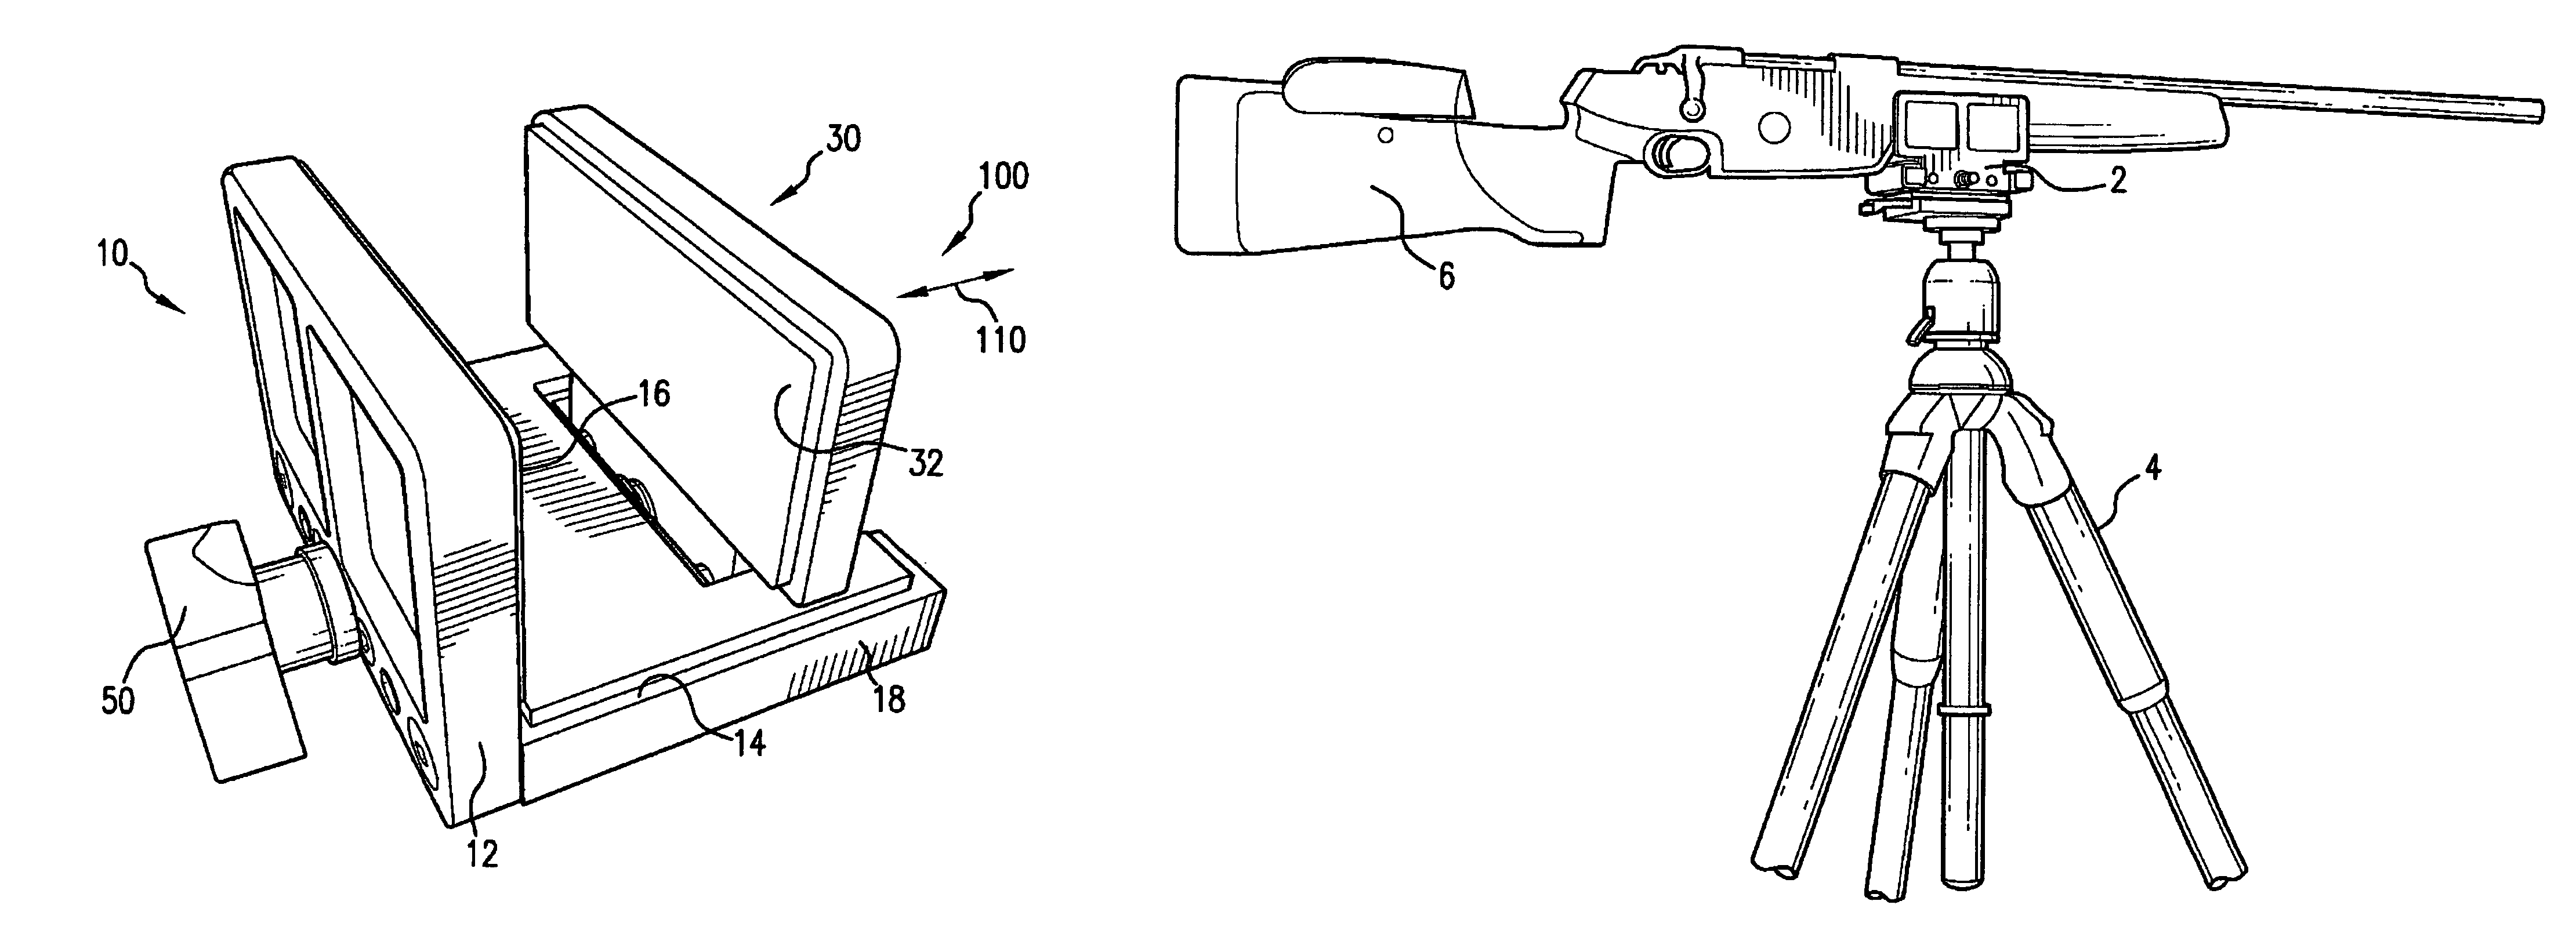 Removable device configured to secure an instrument and to be mounted on a platform